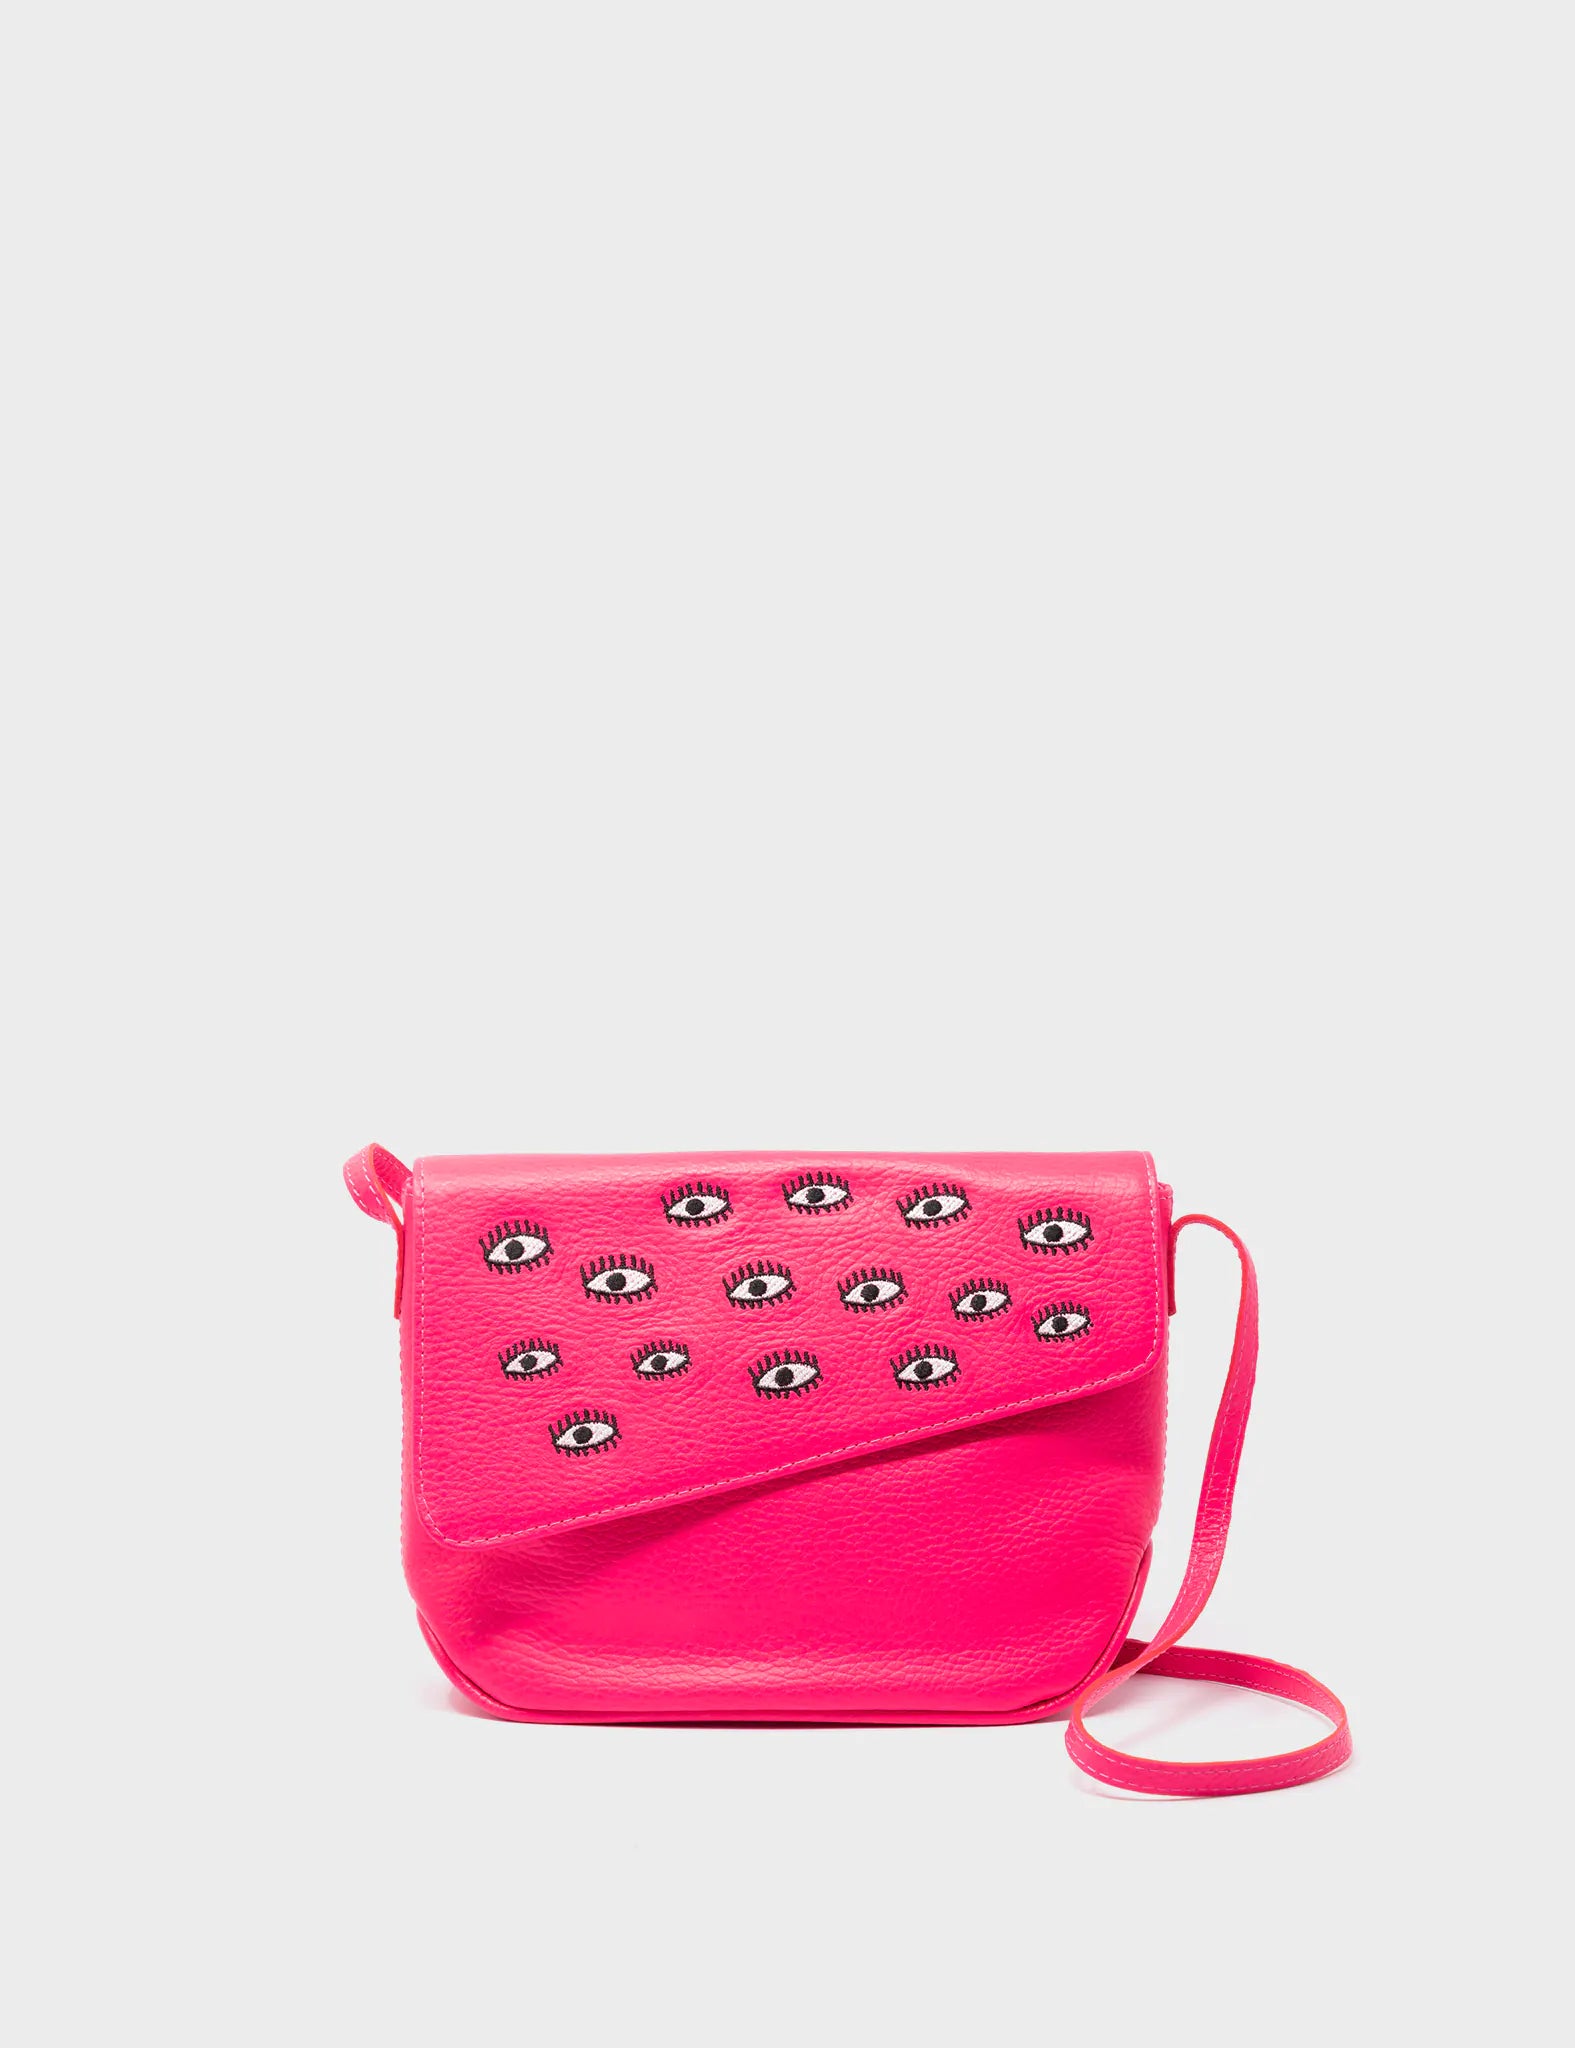 Bruno Mini Crossbody Neon Pink Leather Bag - All Over Eyes Embroidery - Front View